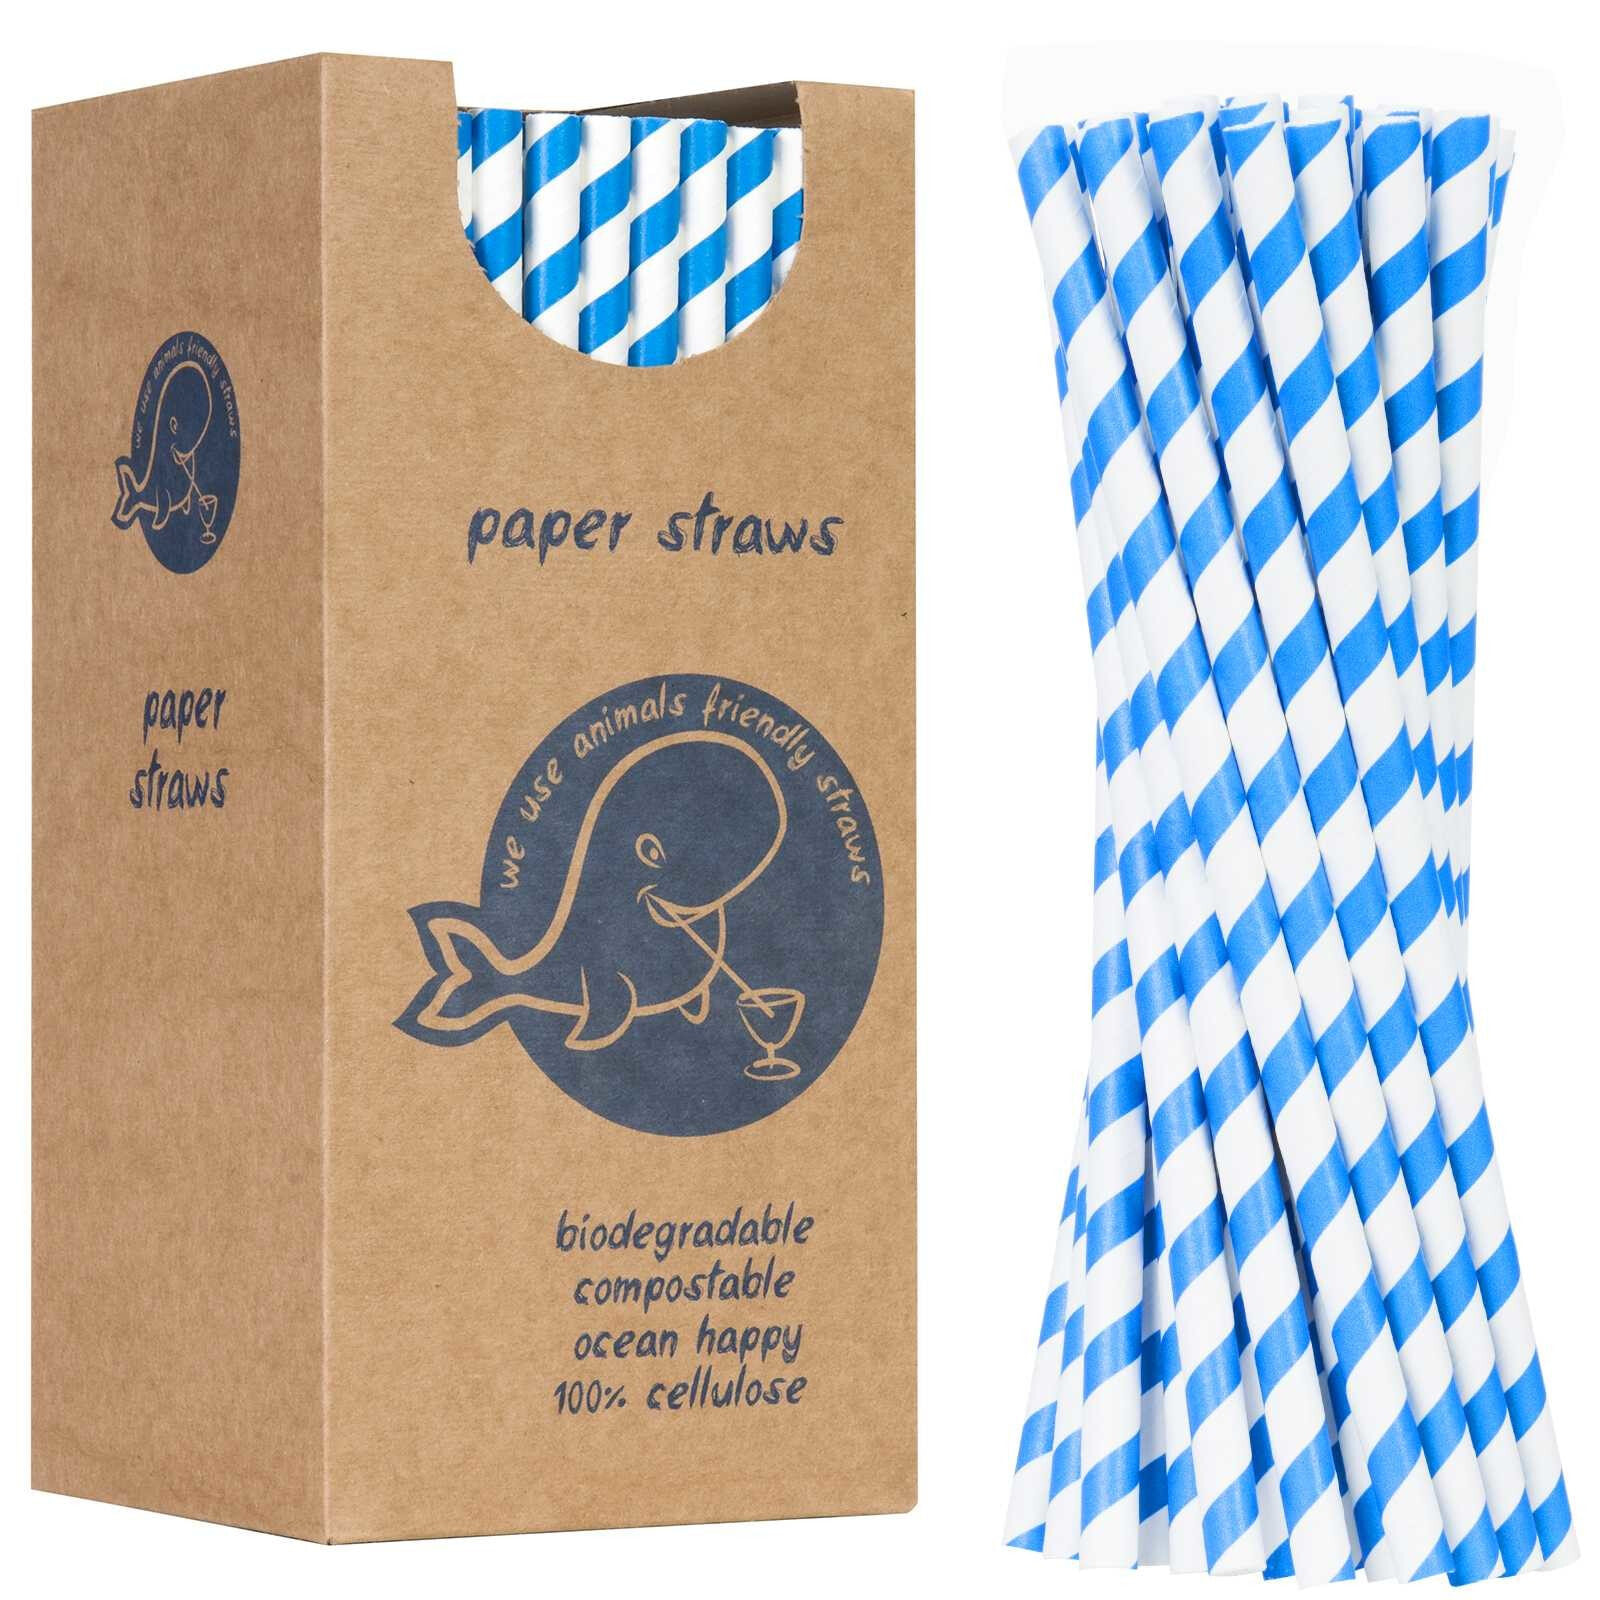 Paper straws BIO ecological PAPER STRAWS 6 / 205mm - white and blue 250 pcs.